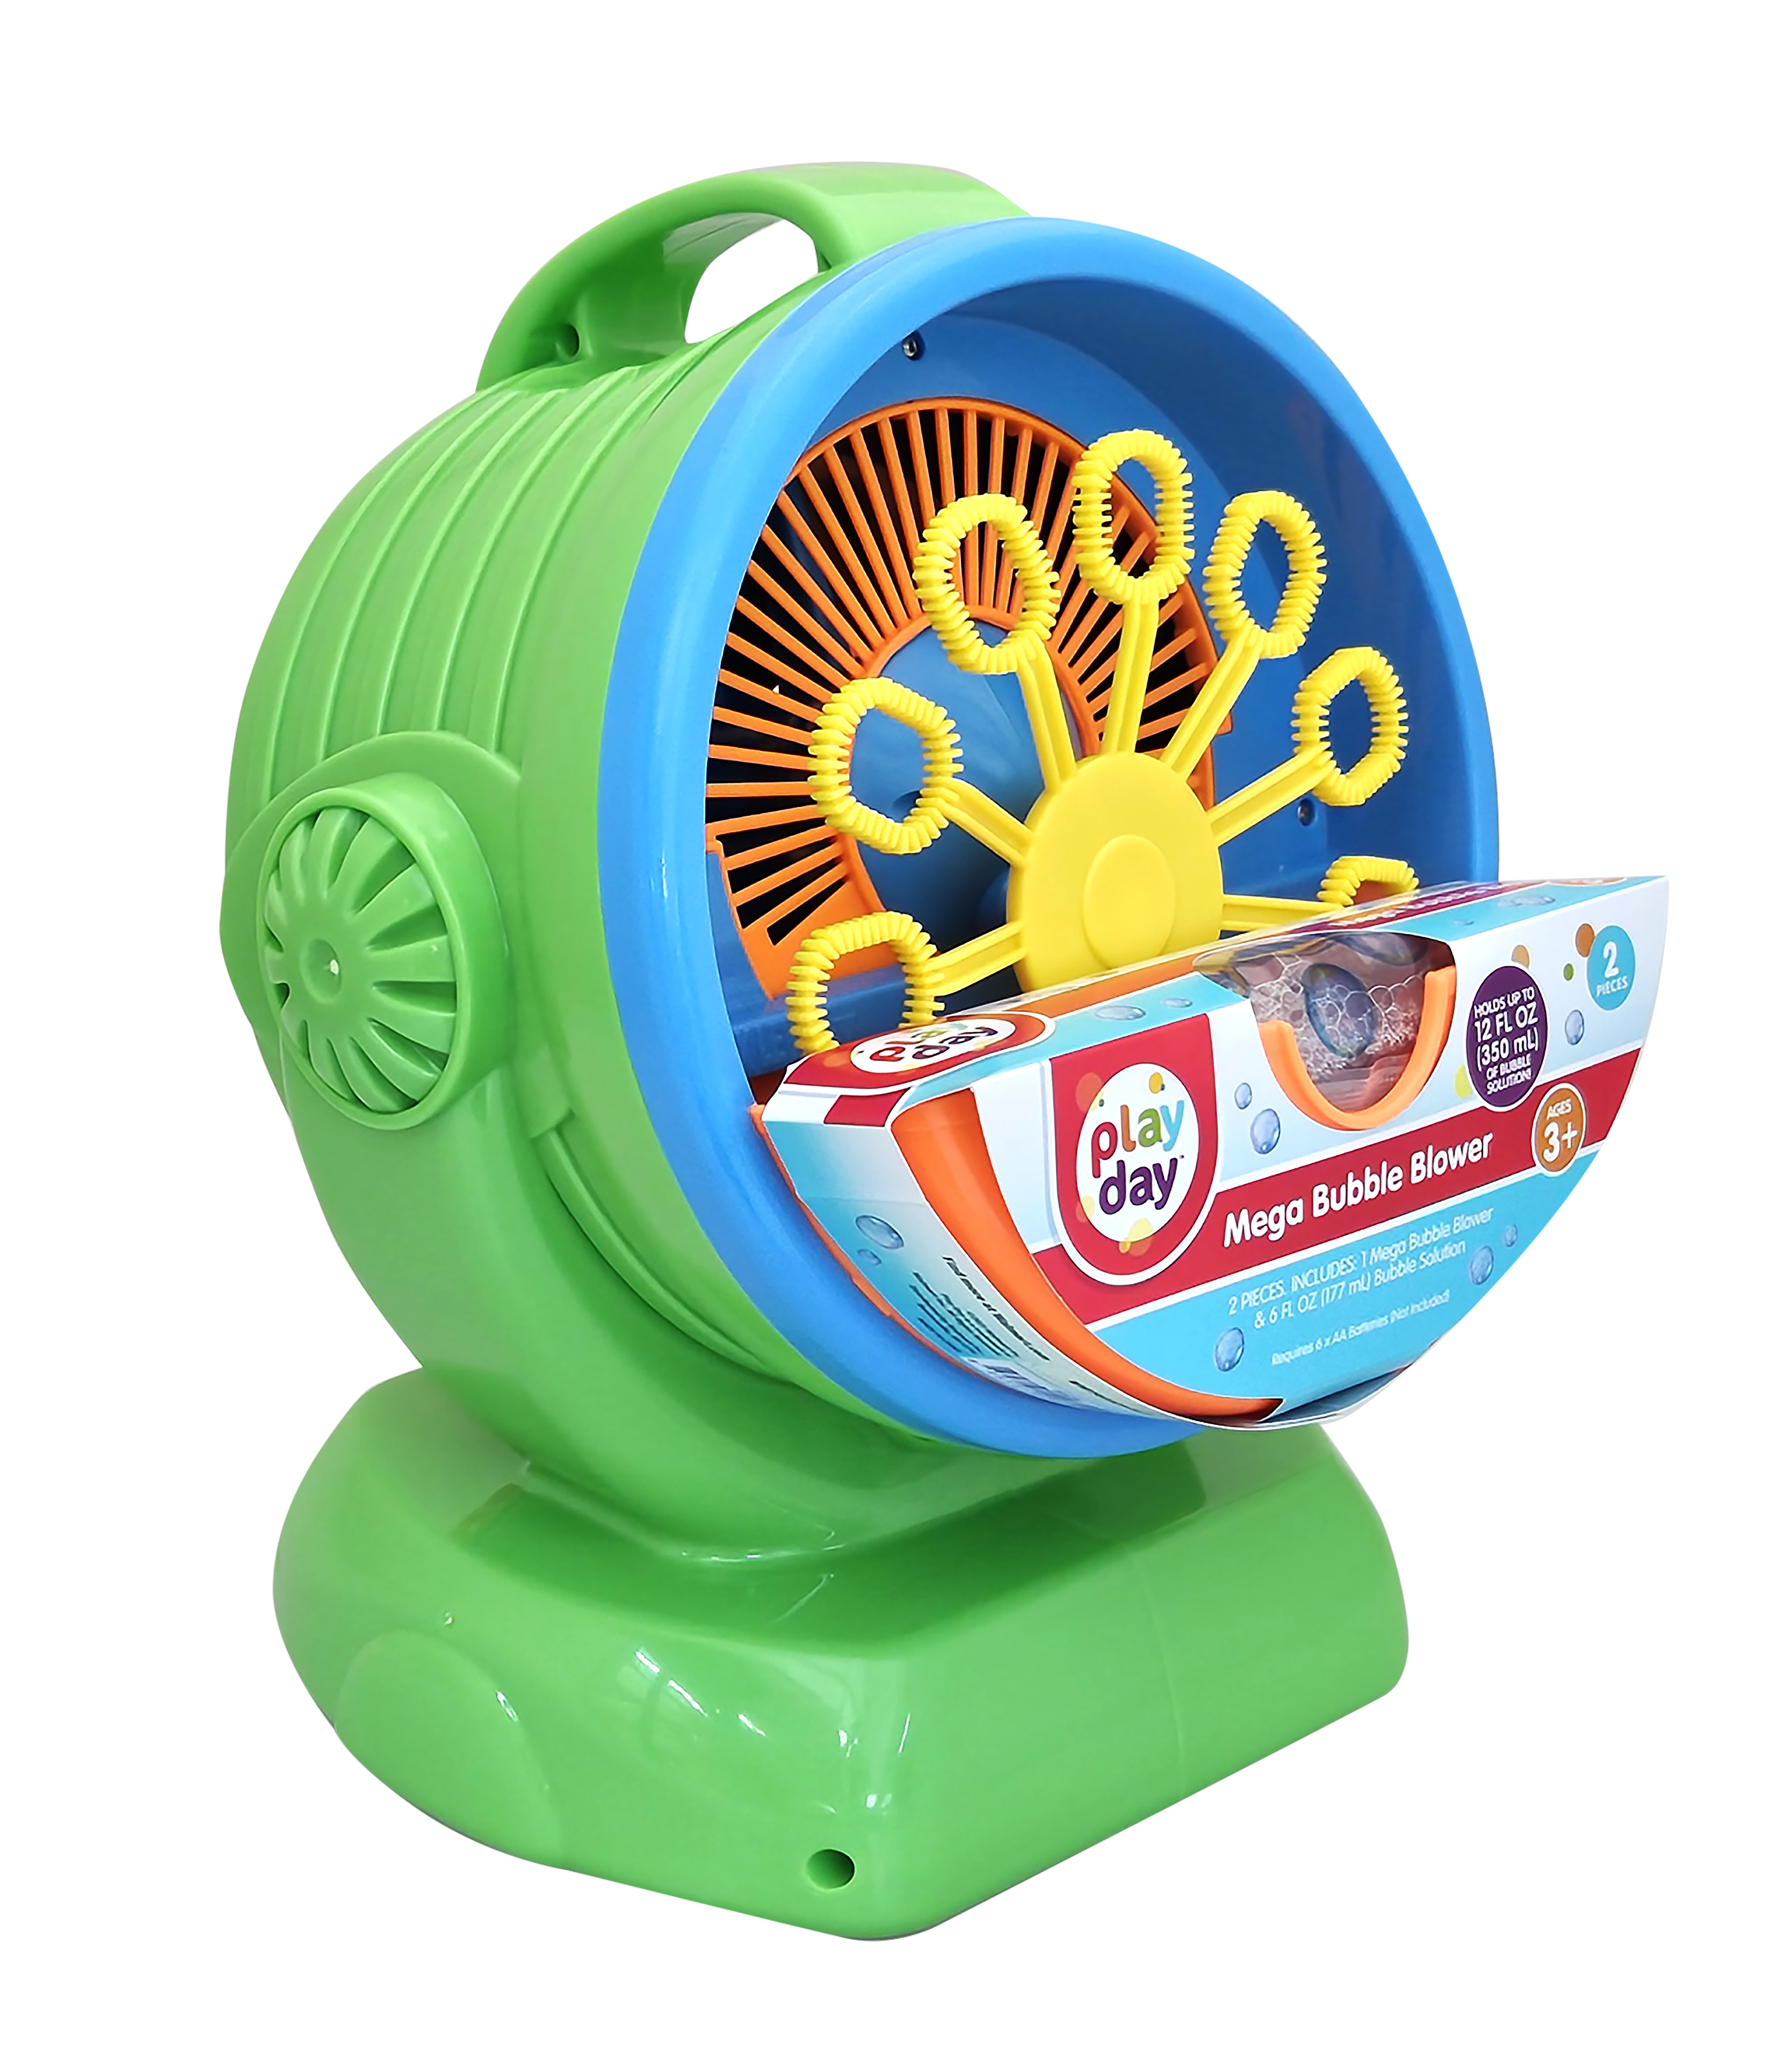 Play Day Mega Bubble Blower, Battery Operated, Bubble Blowing Toy Machine - image 4 of 7